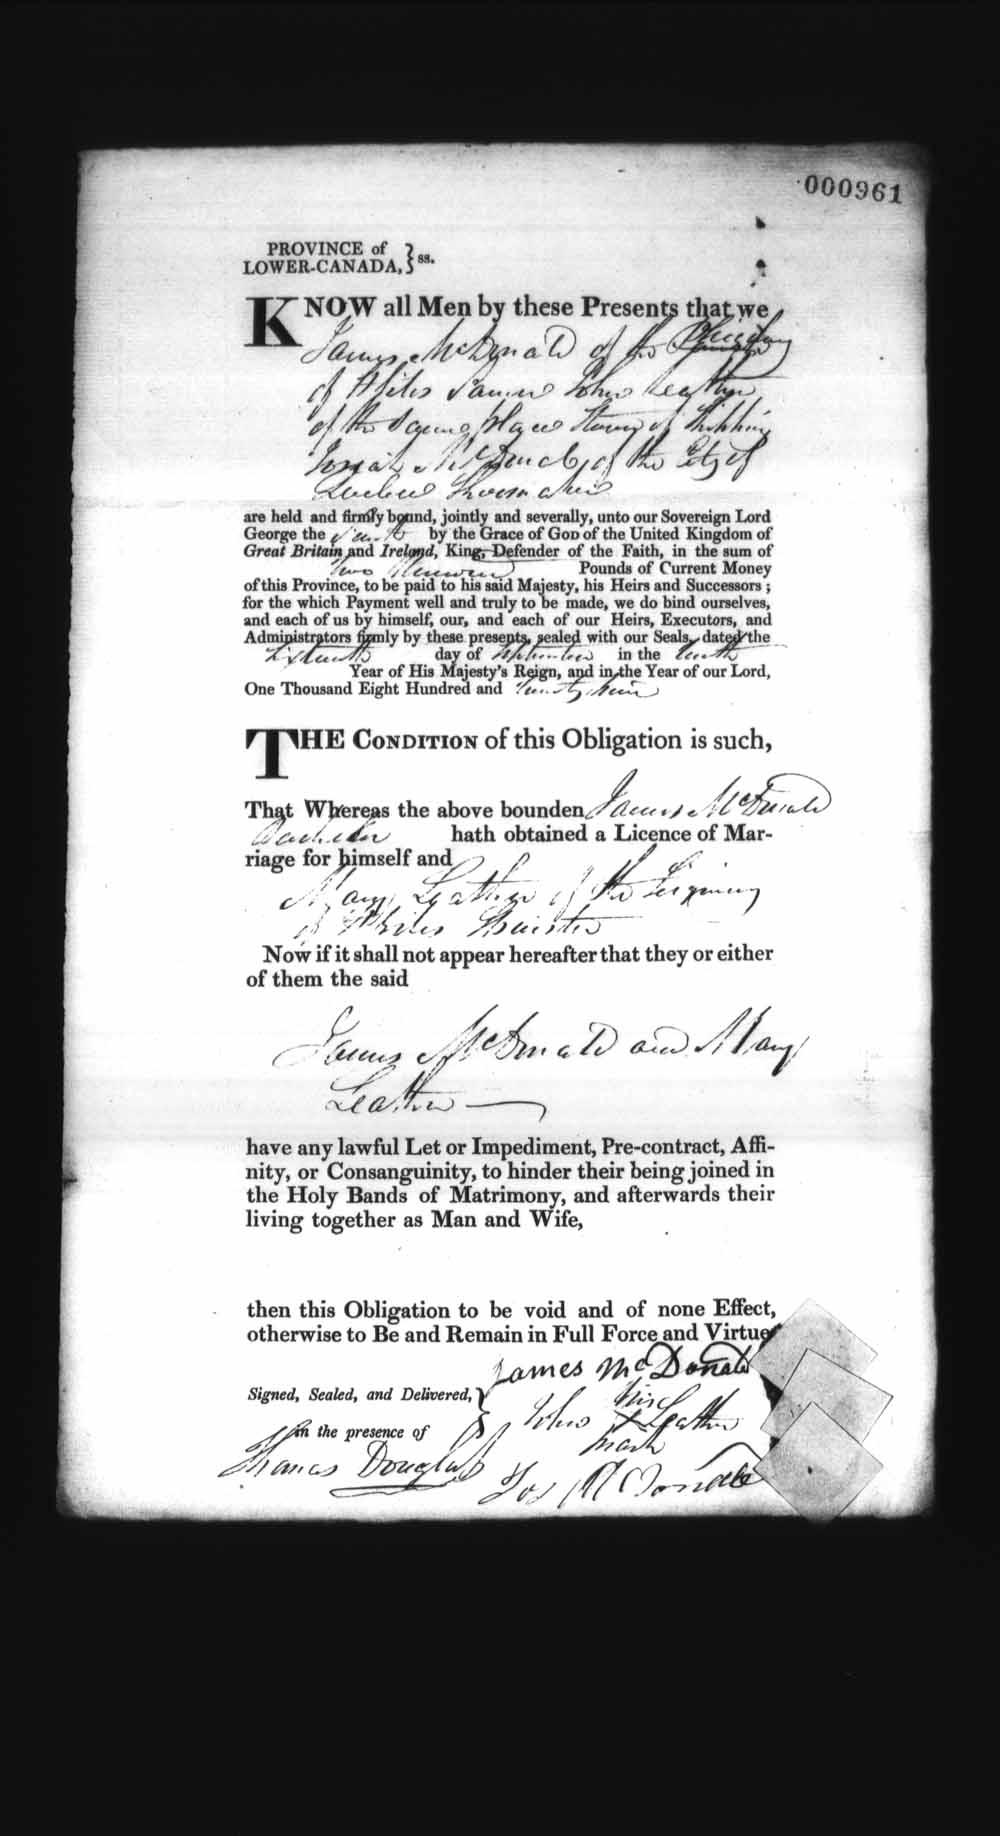 Digitized page of Upper and Lower Canada Marriage Bonds (1779-1865) for Image No.: e008237068